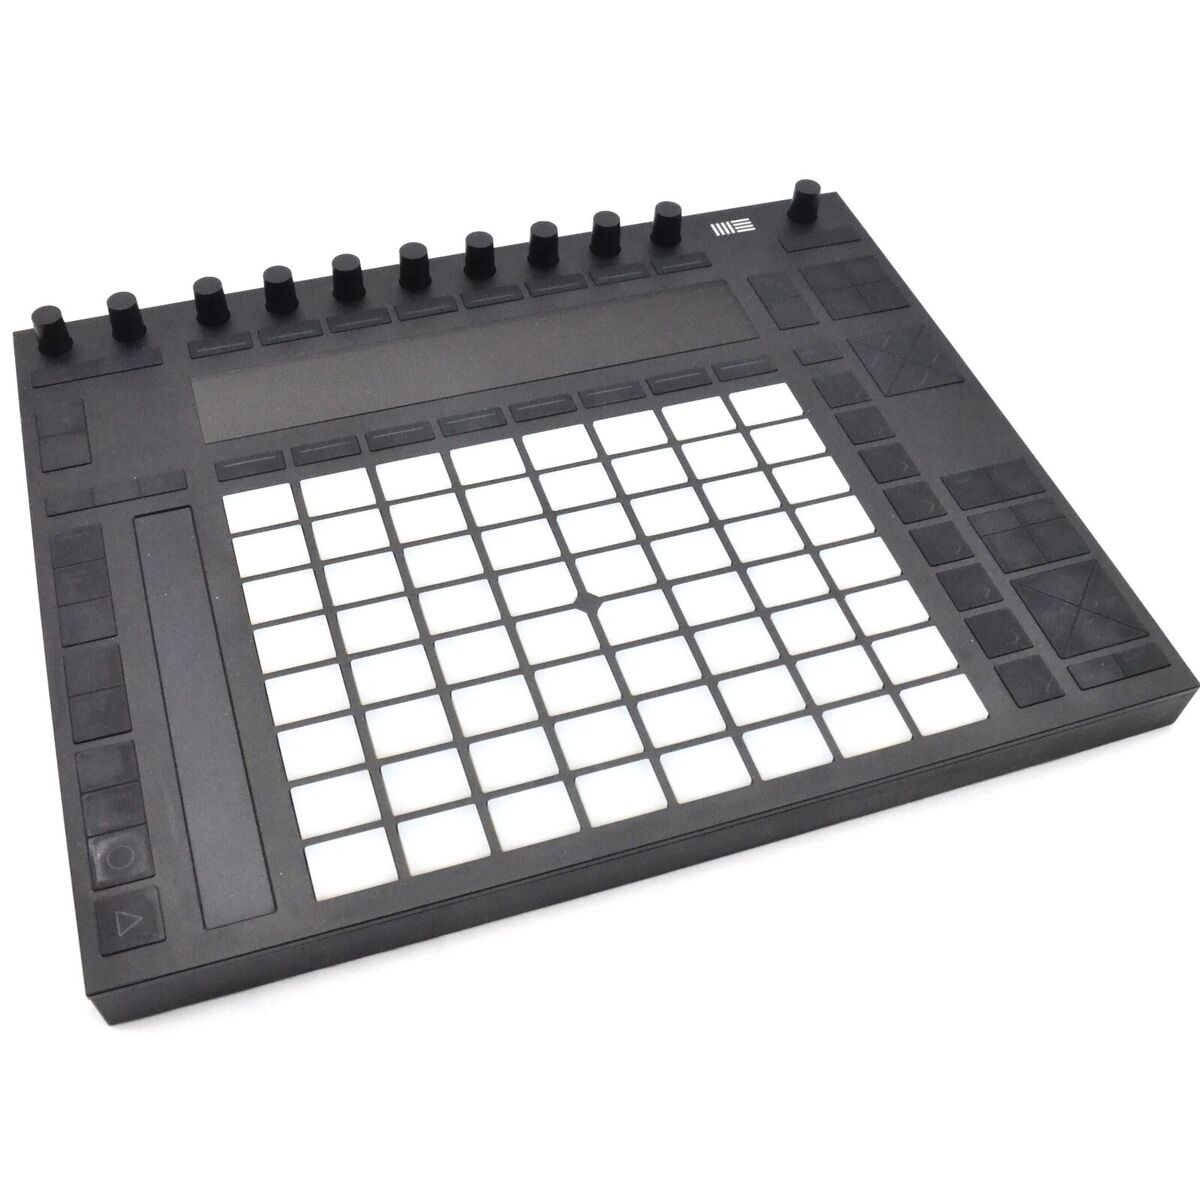 Ableton Push 2 Live MIDI Controller Intrument Used with box, cable